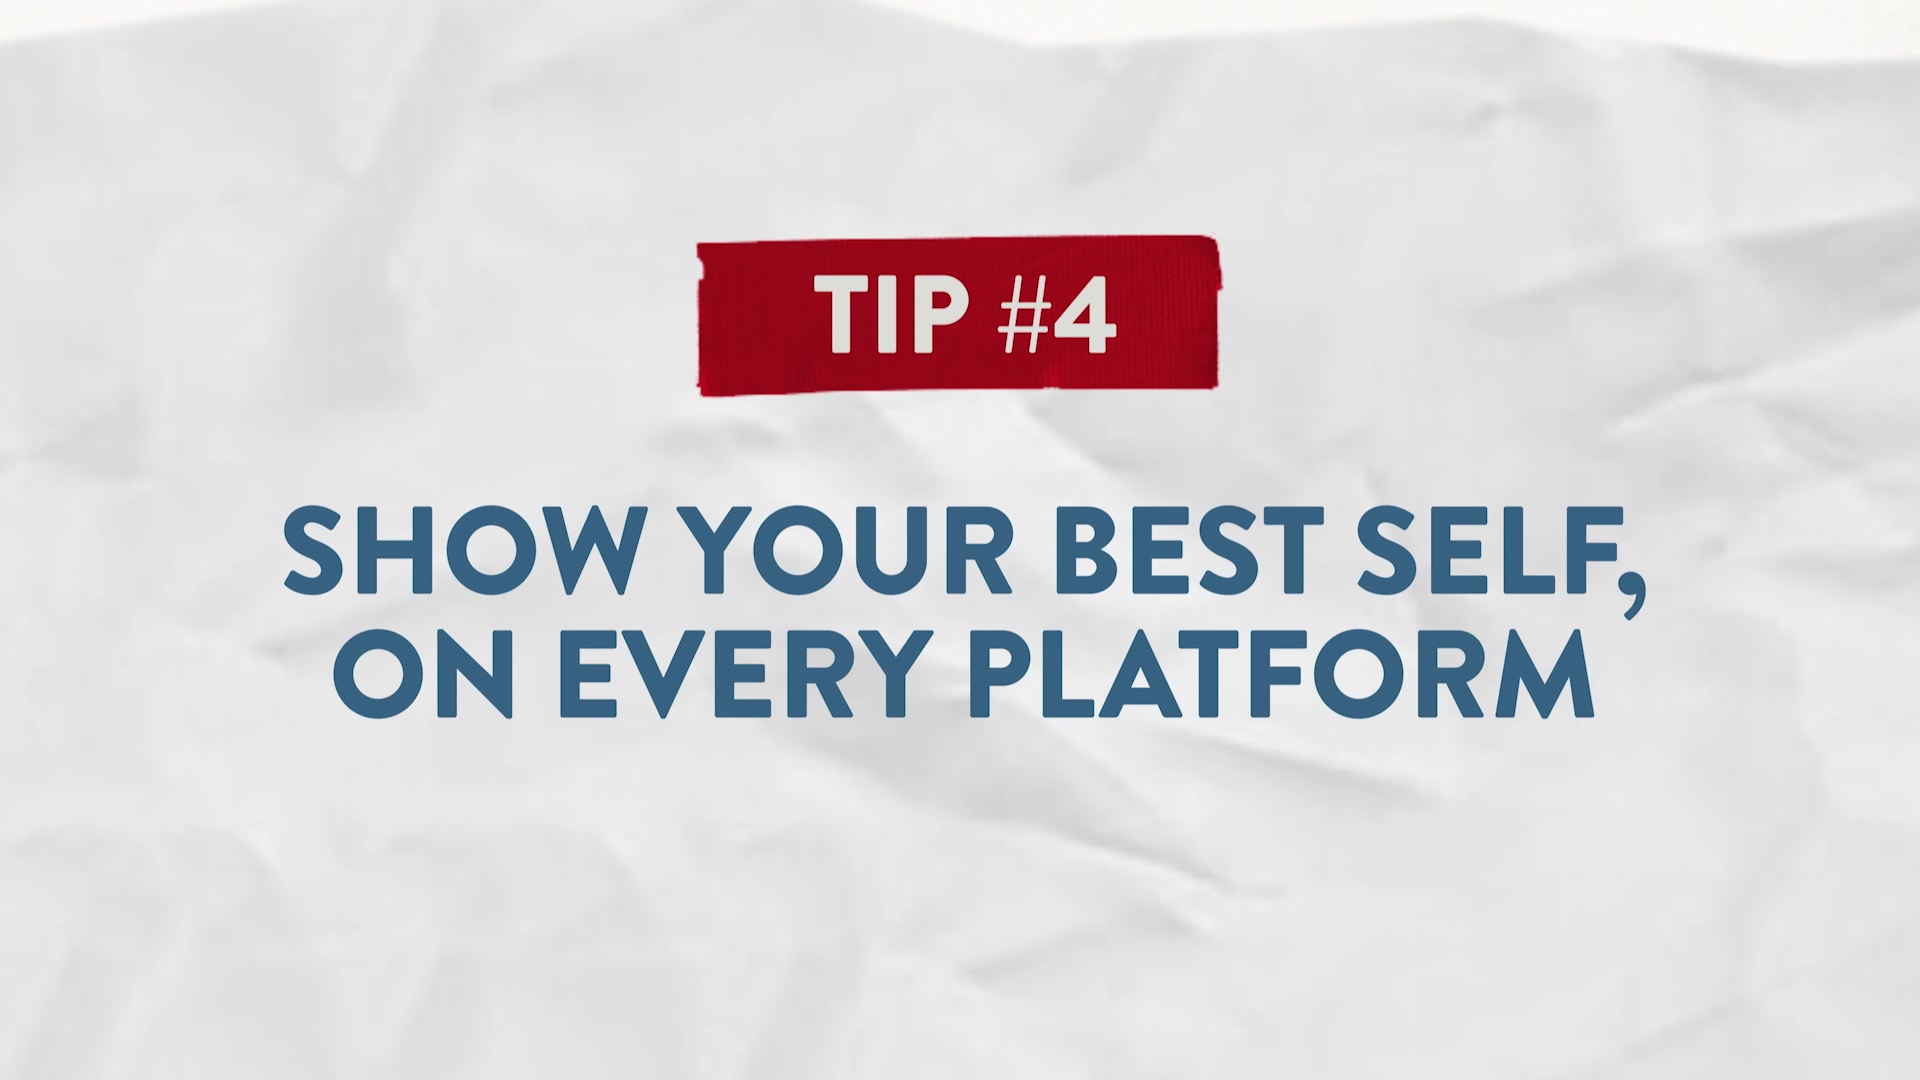 Tip #4 Show Your Best Self, On Every Platform